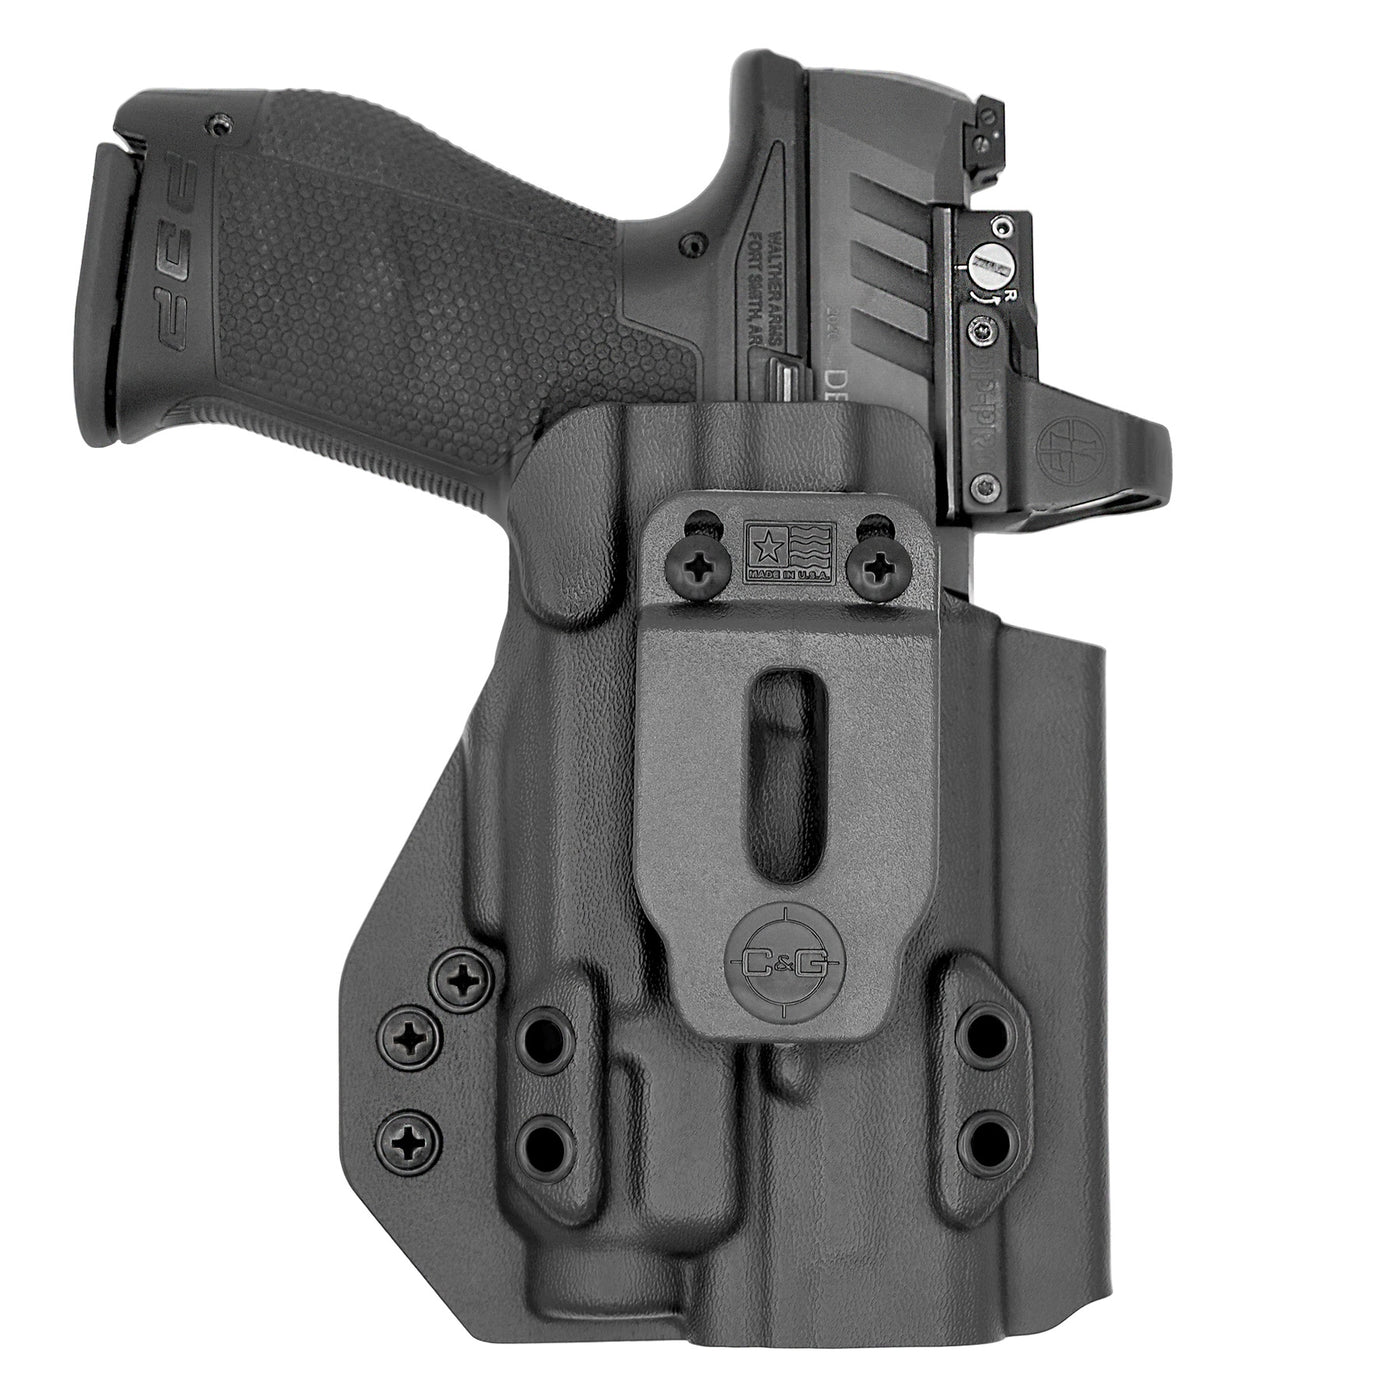 C&G Holsters quickship IWB Tactical CZ P07/09 Streamlight TLR7/a in holstered position